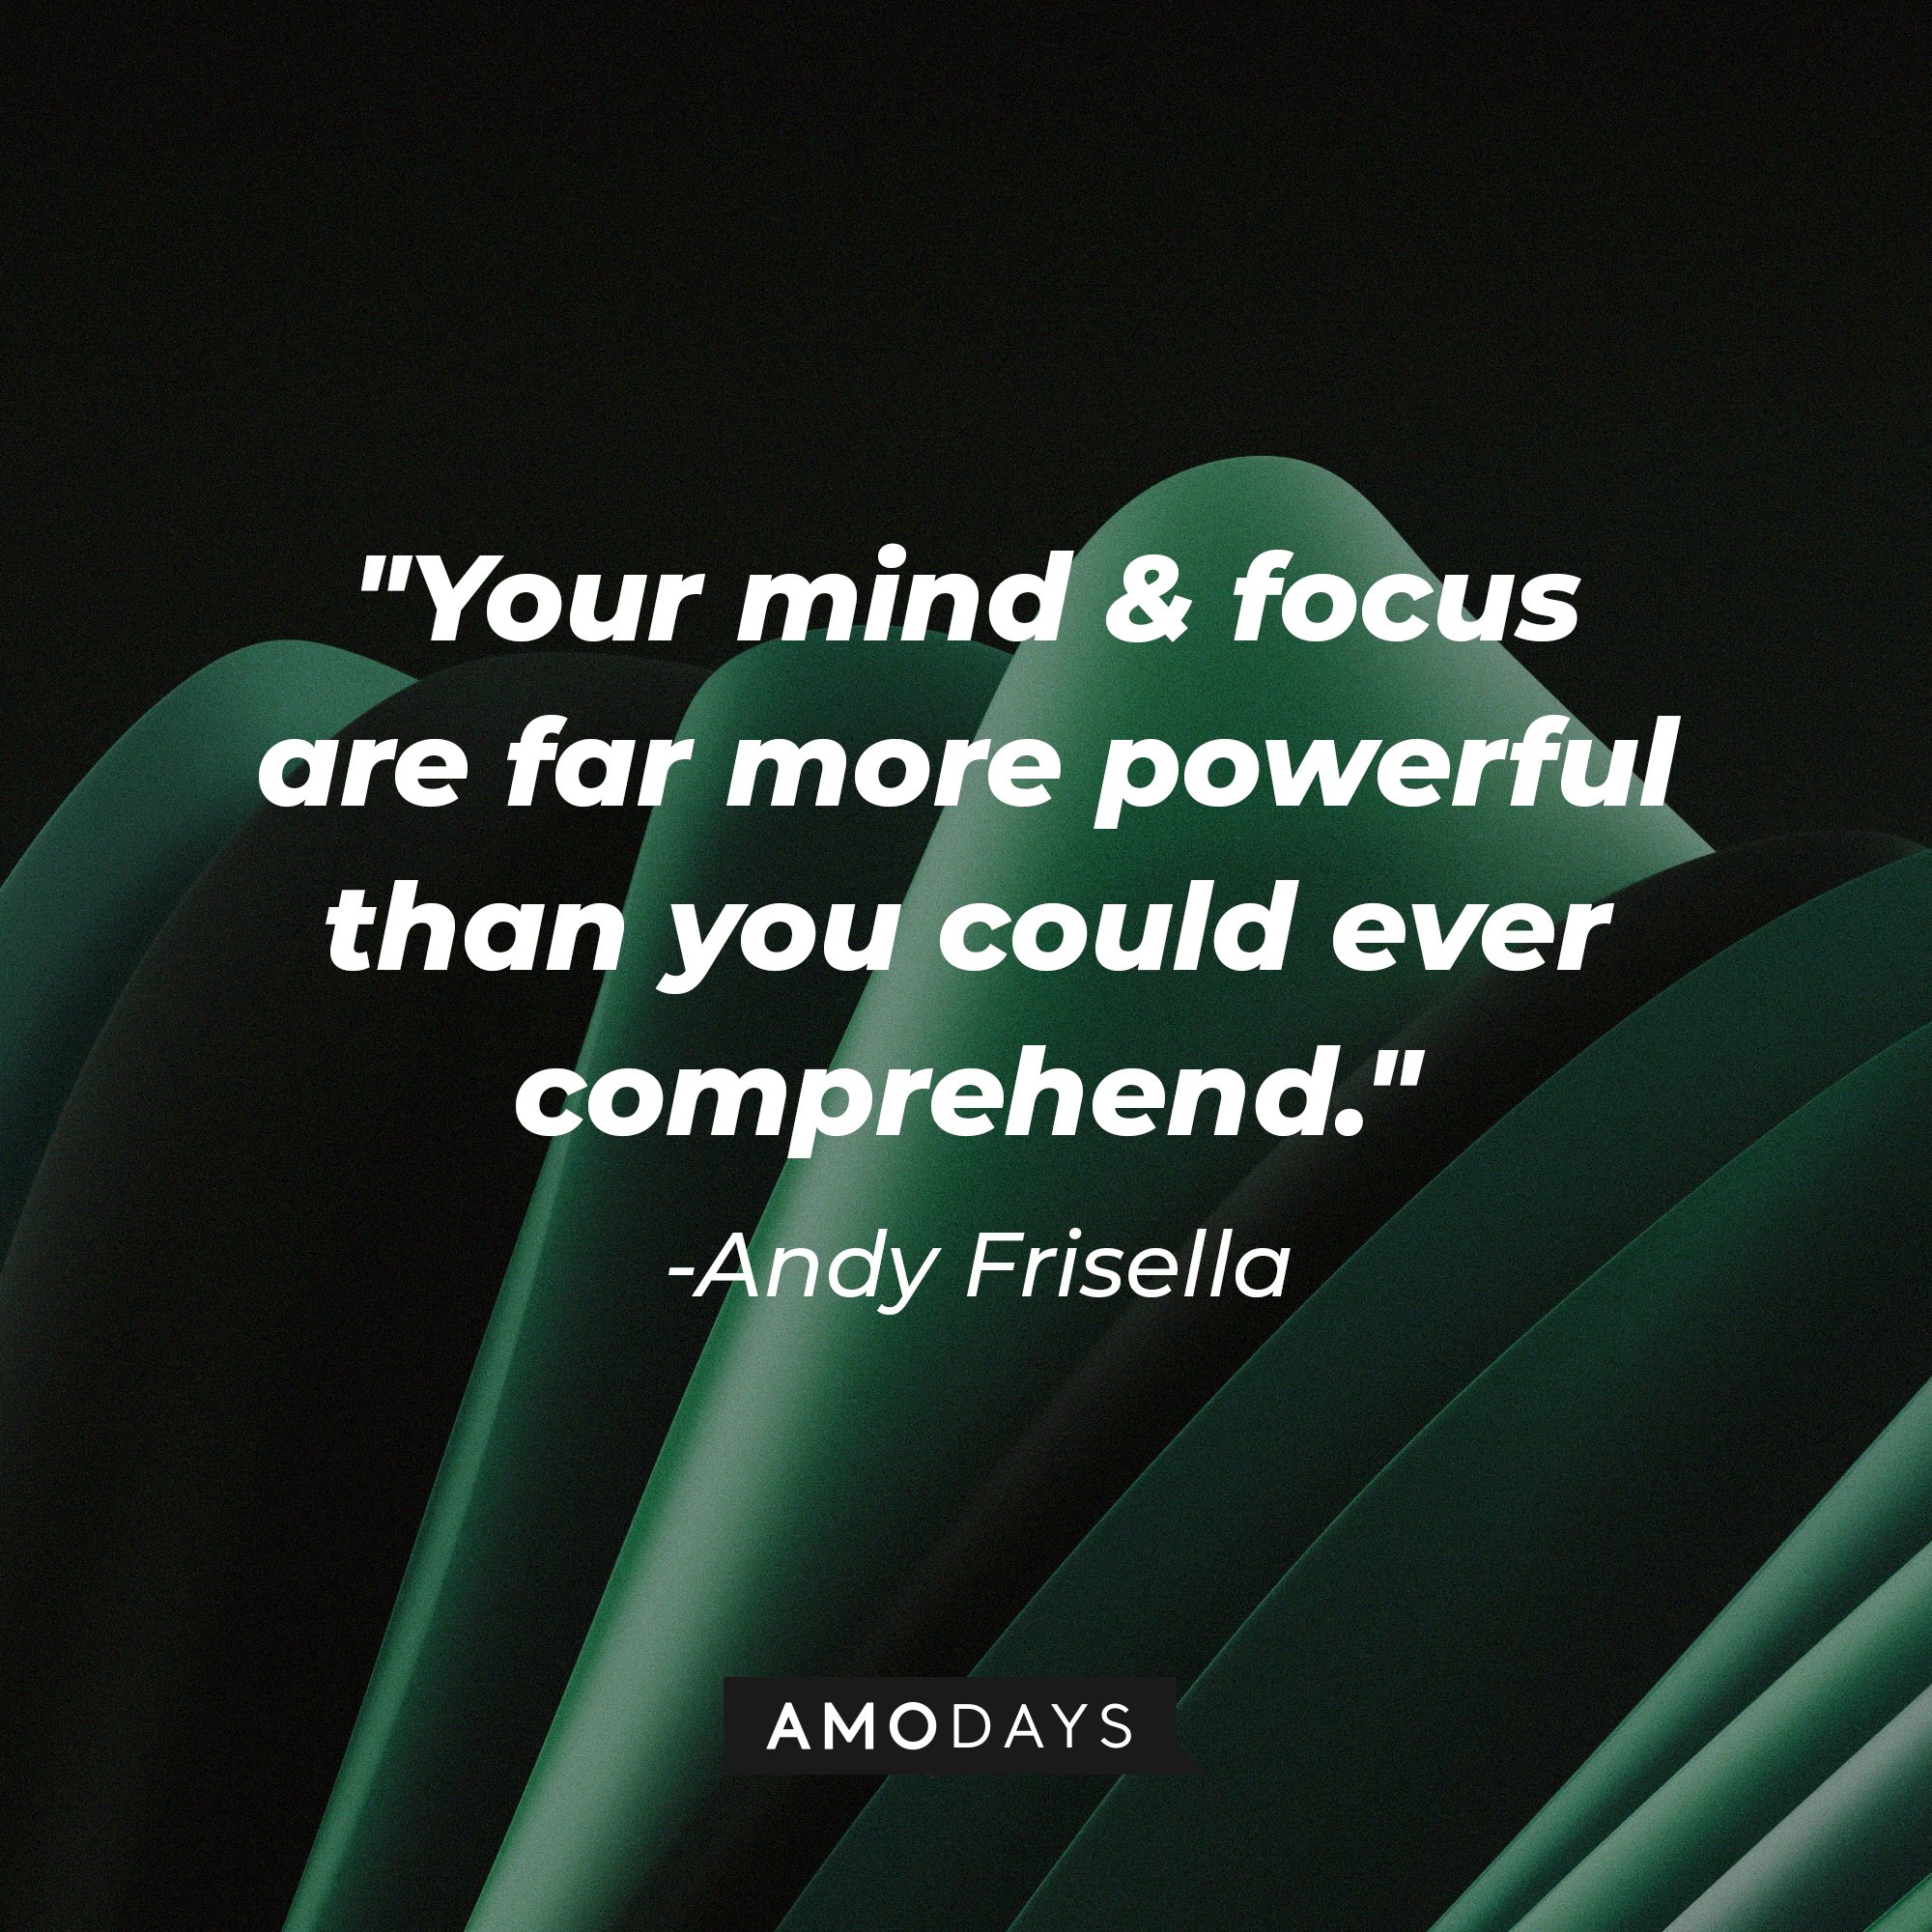 Andy Frisella's quote: "Your mind and focus are far more powerful than you could ever comprehend." | Image: AmoDays